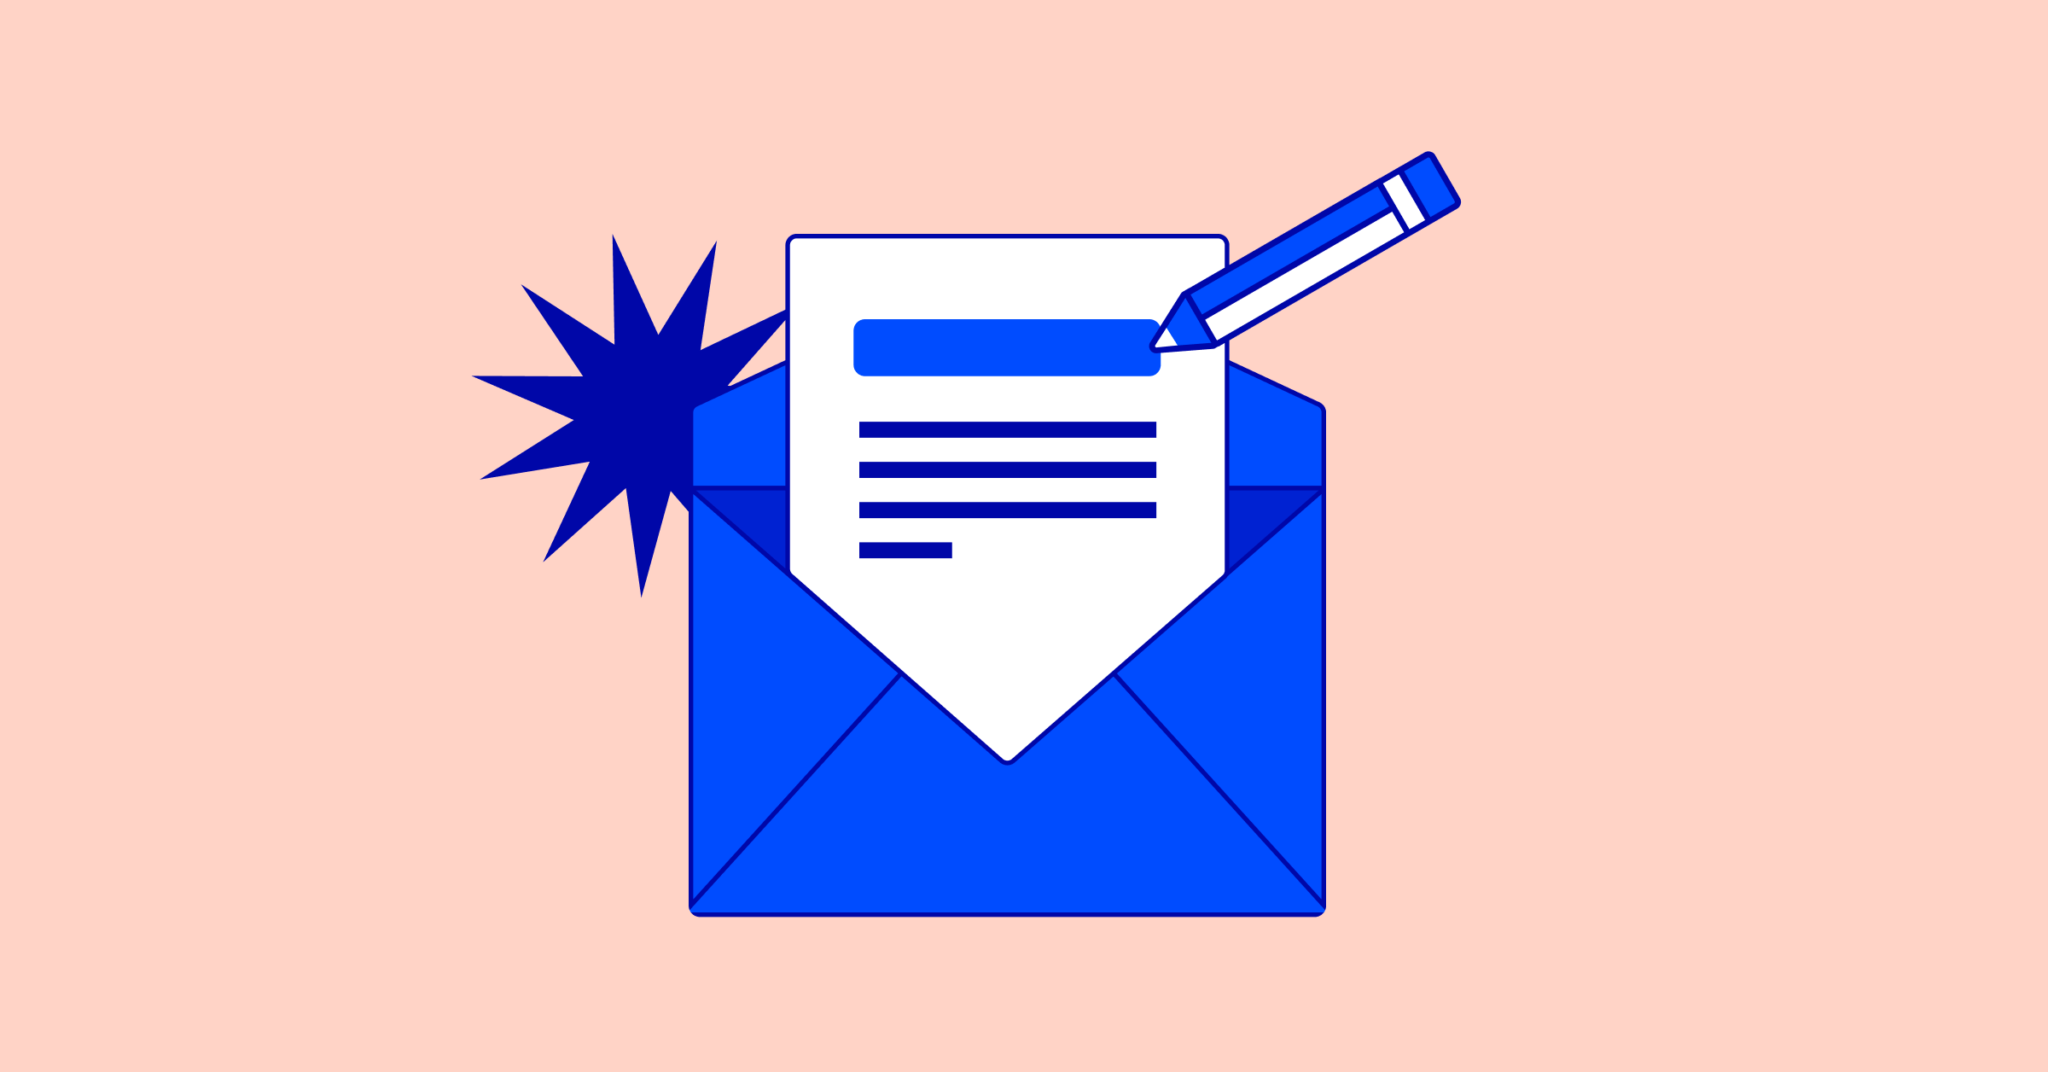 No-Reply Emails: Why They’re Bad For Customer Experience